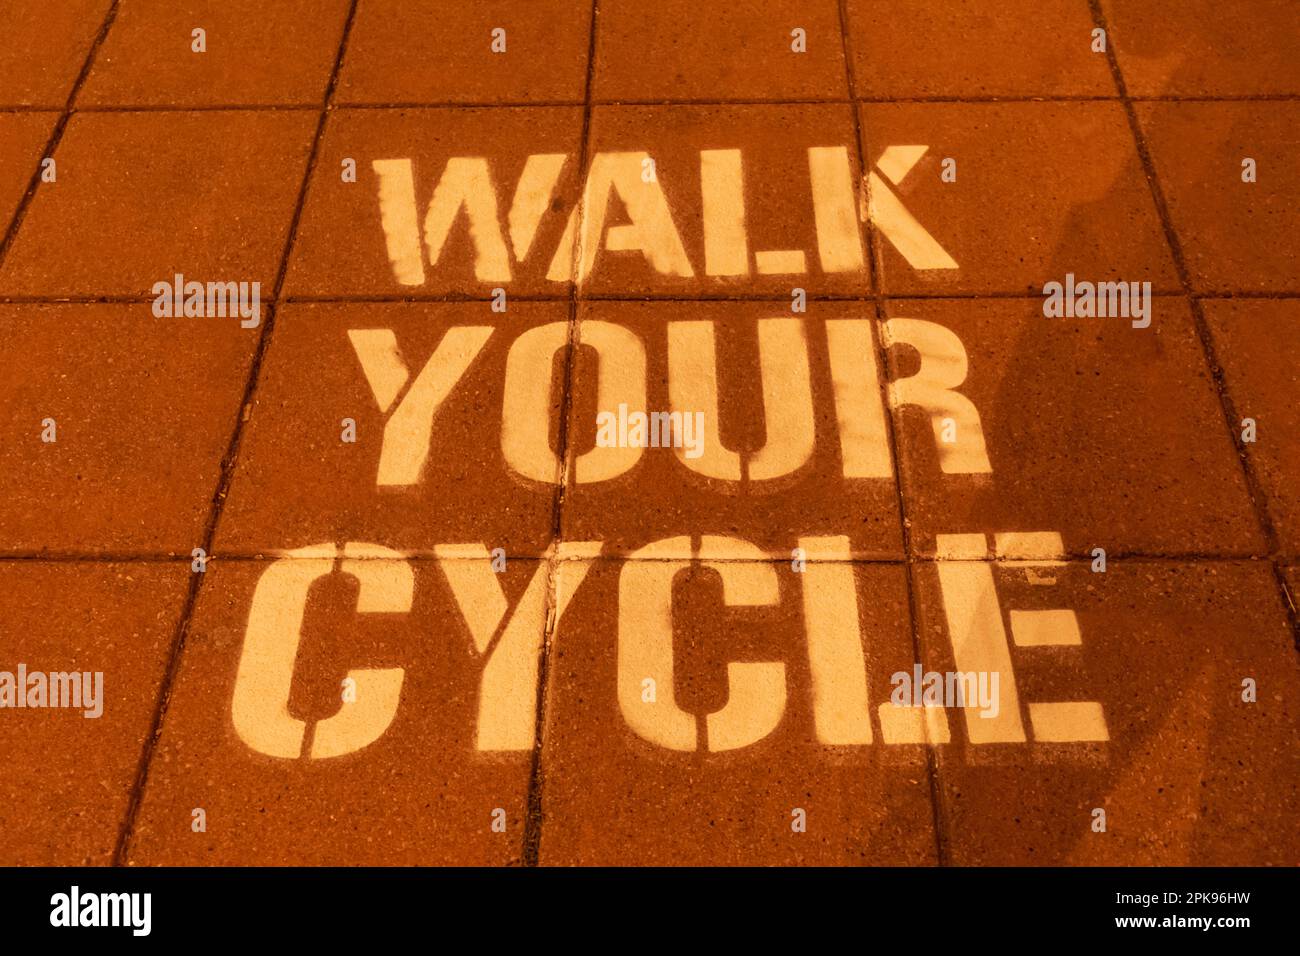 England, East Sussex, Brighton, Walk Your Cycle Sign on Pavement Stock Photo